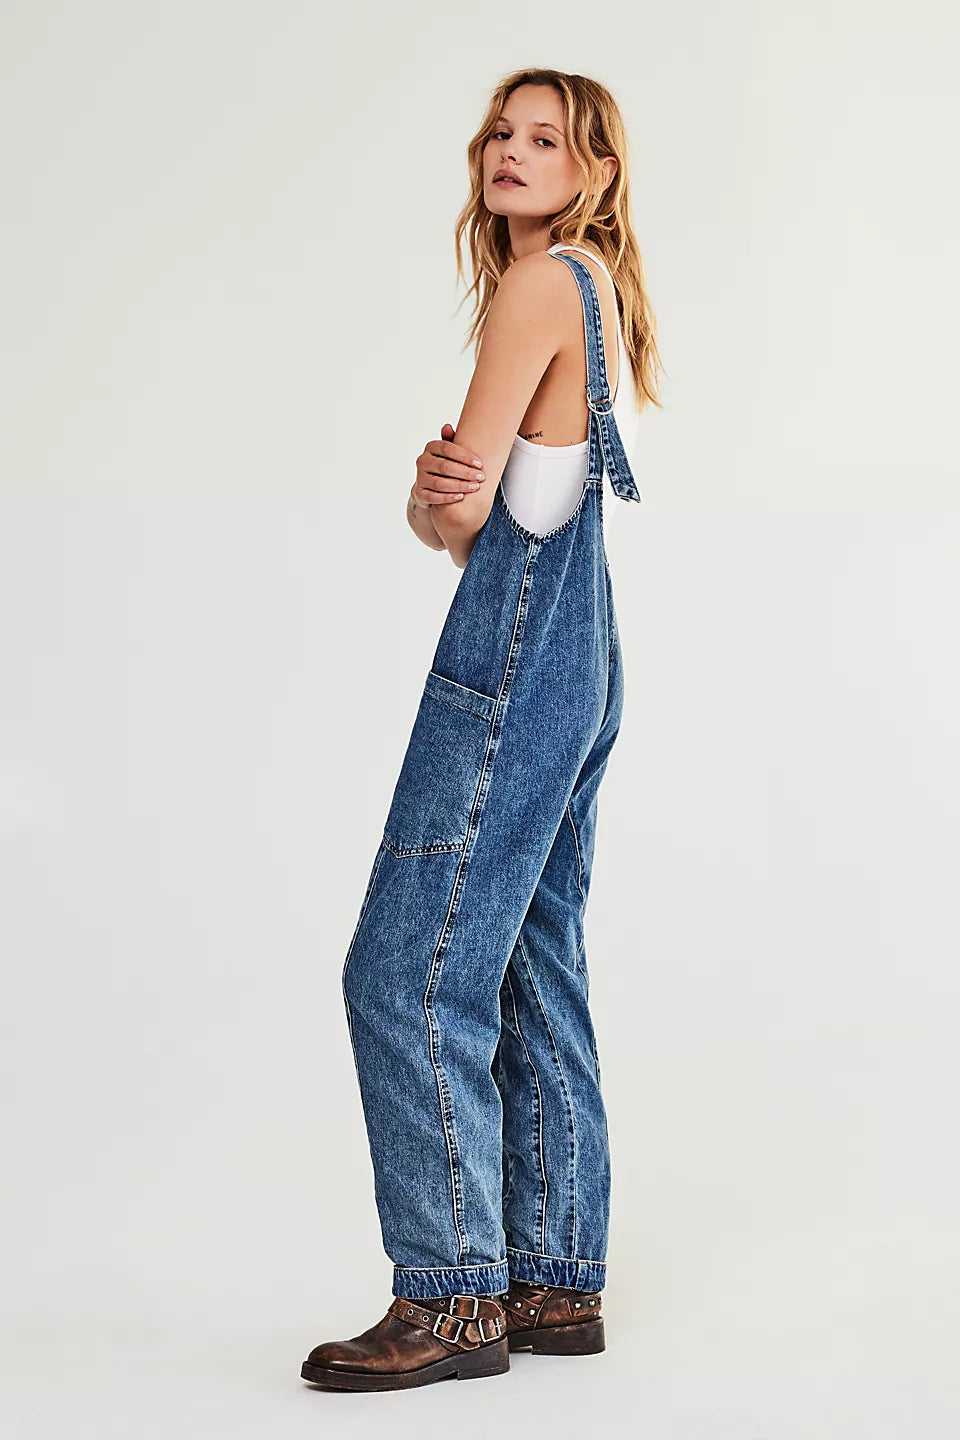 FREE PEOPLE-"HIGH ROLLER"JUMPSUIT